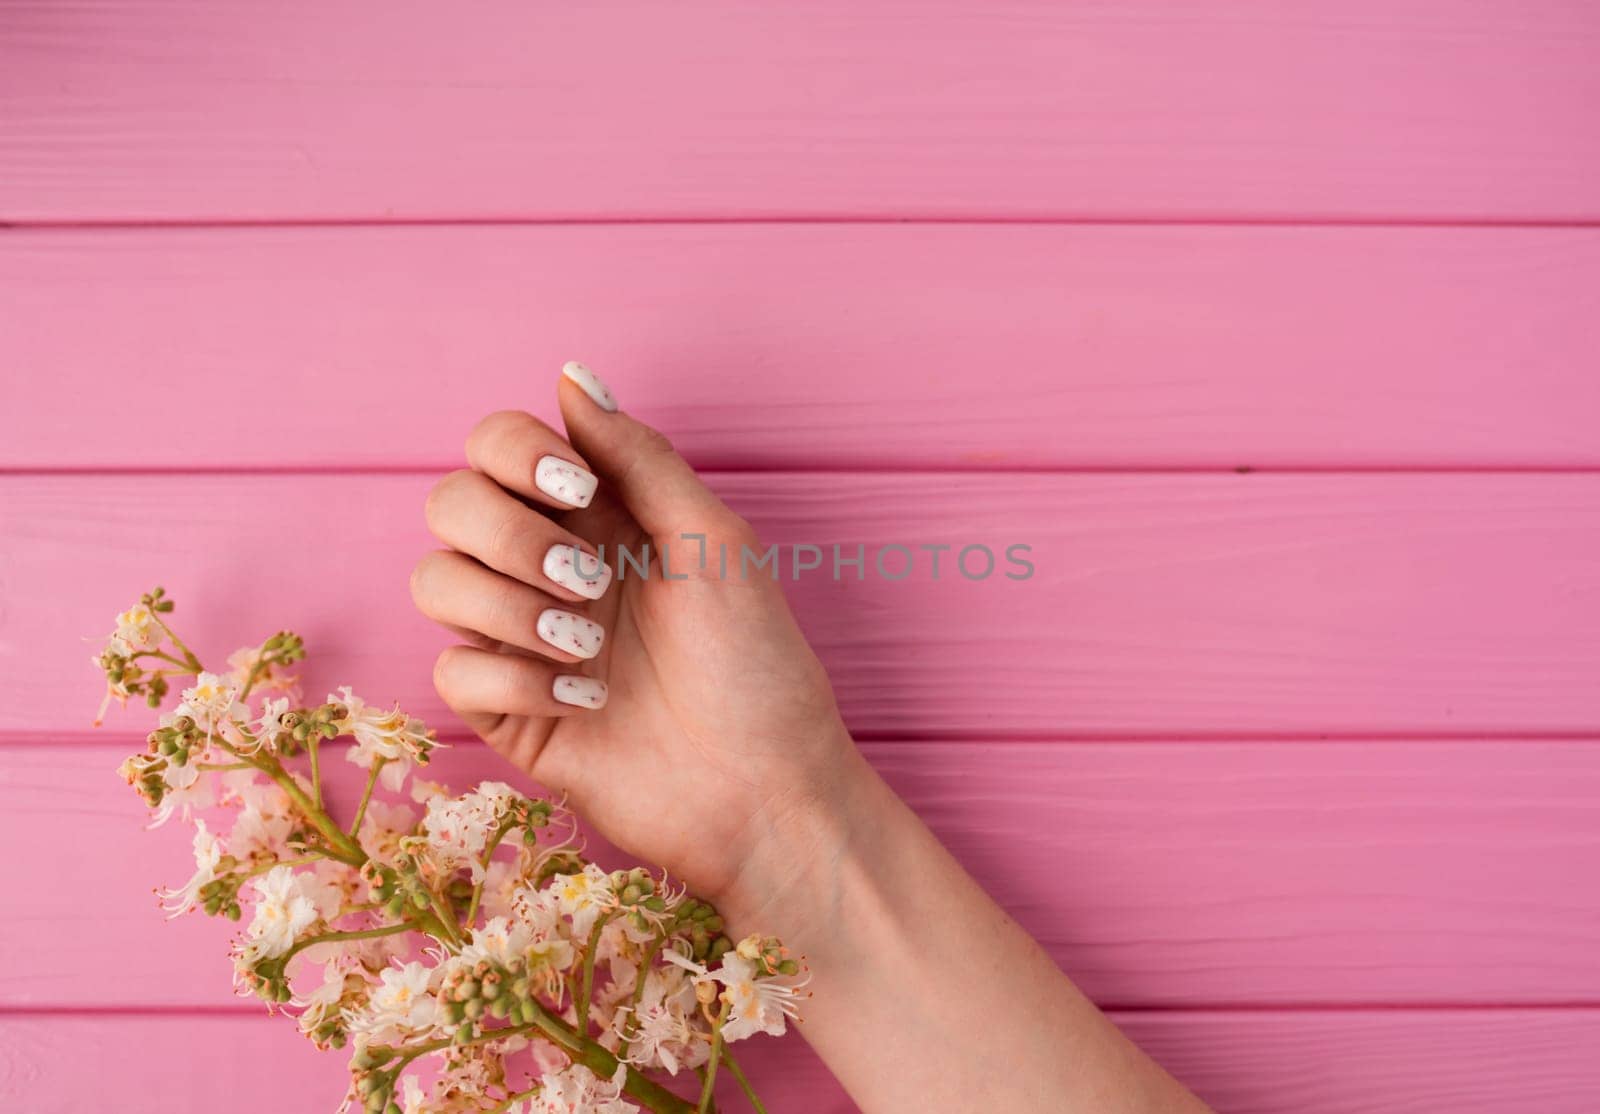 Summer abstract background mockup template free copy space for text pattern sample top view above pink wooden board. blank empty area for inscription woman hand manicure hold blossom flowers chestnut